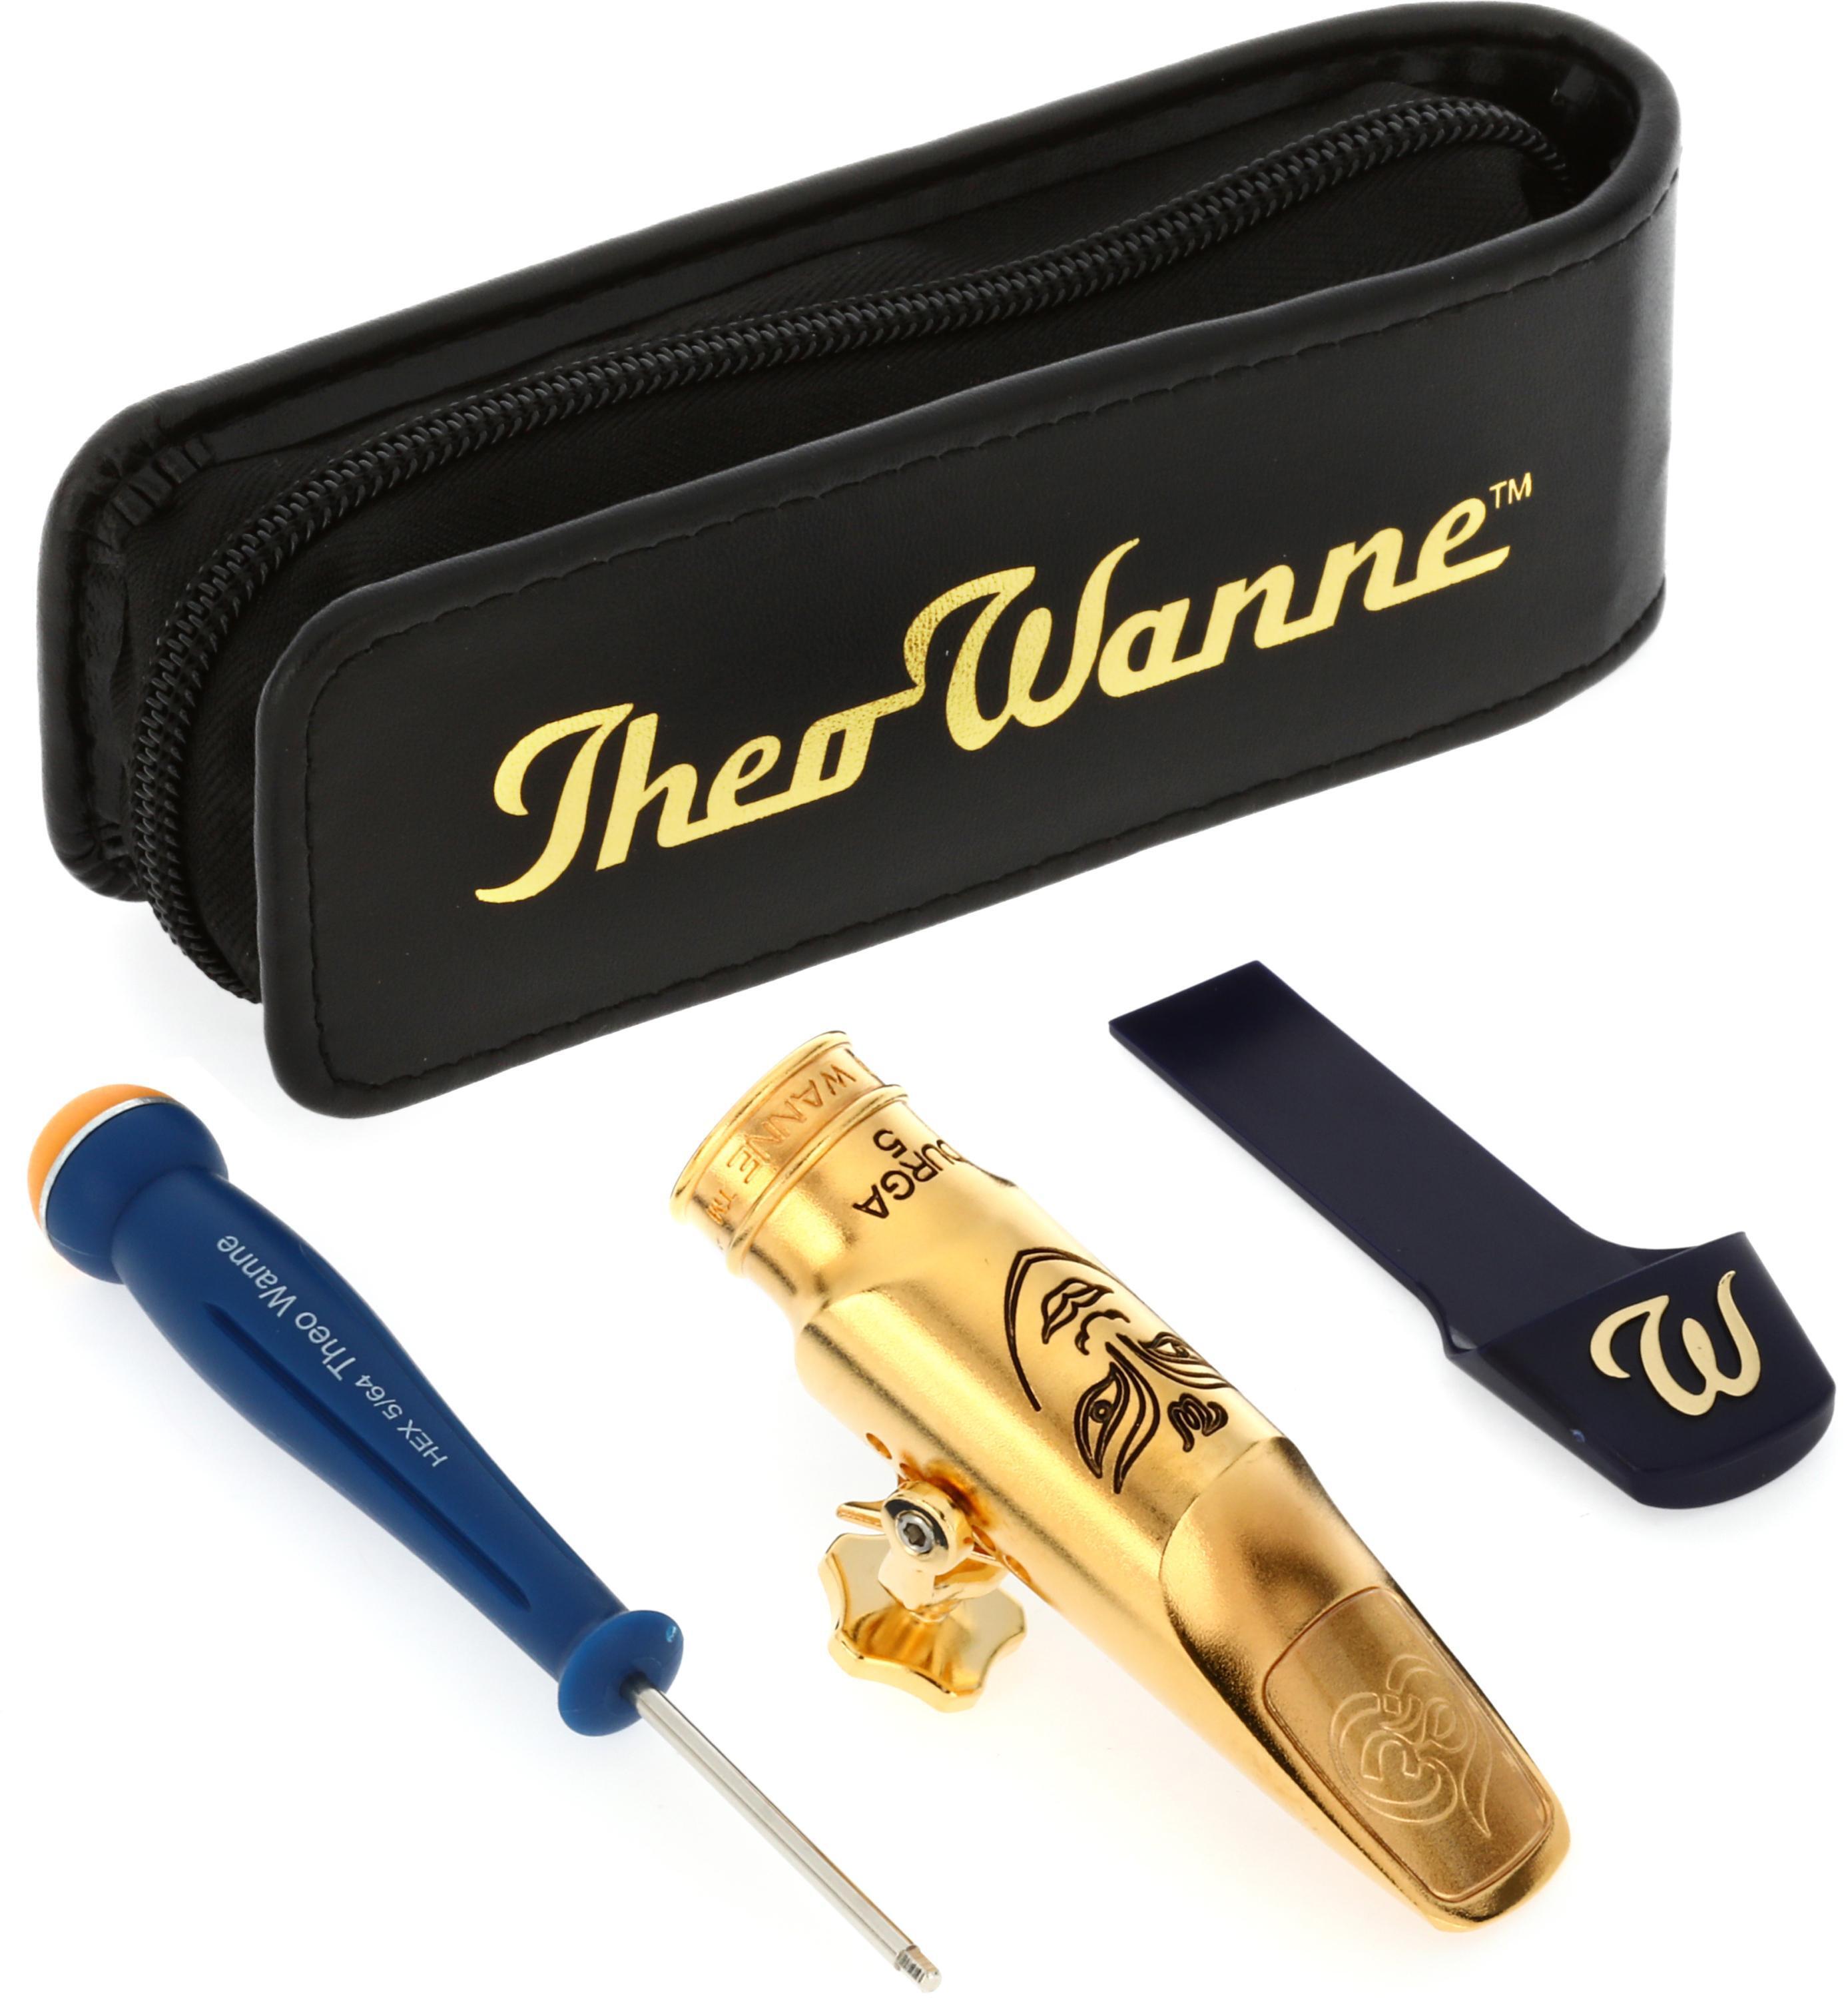 Theo Wanne DU5-AG7 Durga 5 Alto Saxophone Mouthpiece - 7 Gold-plated